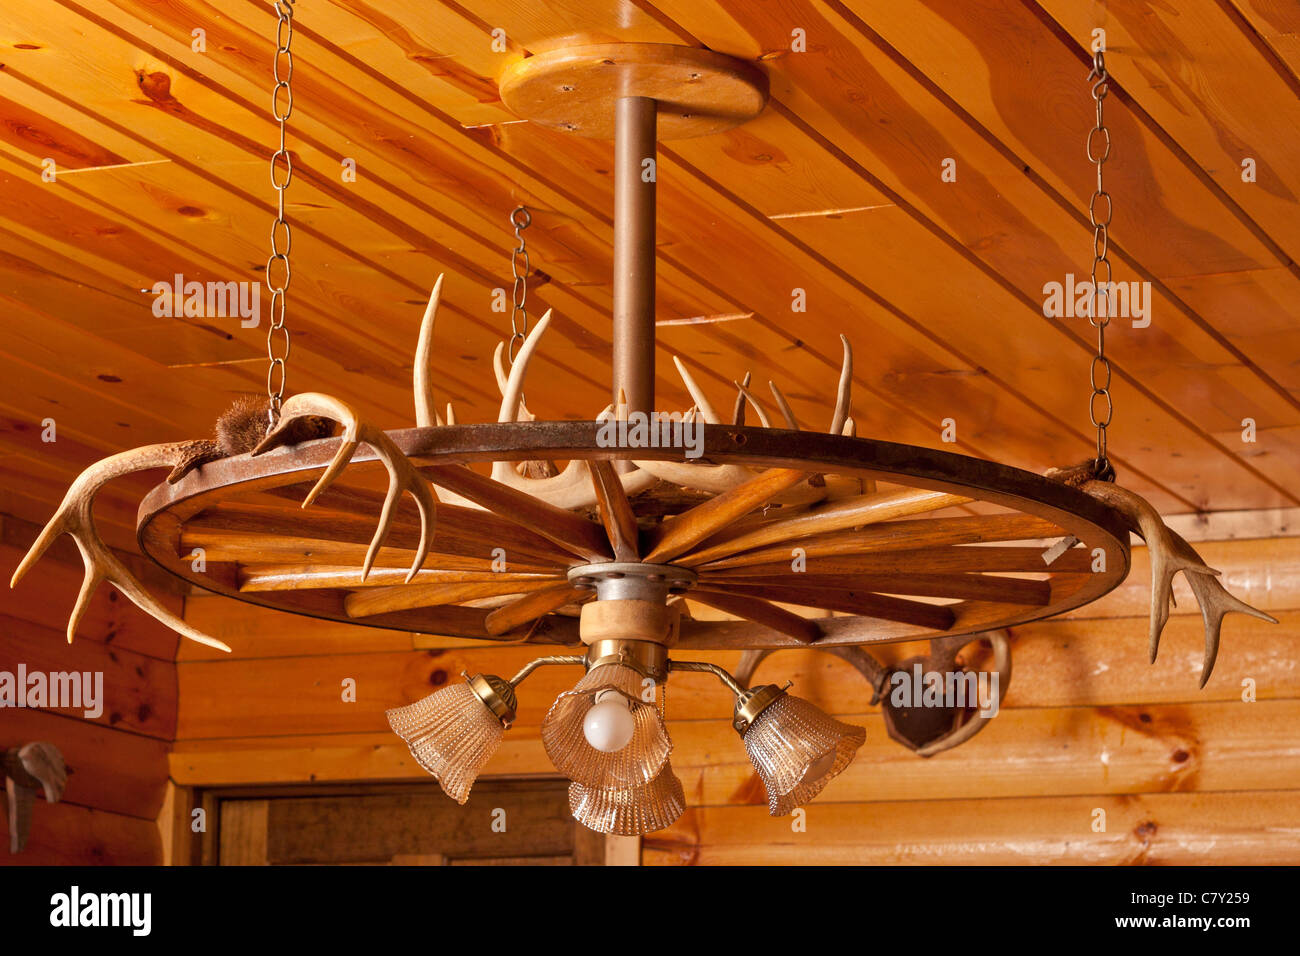 Antler Chandelier with light fixture hanging from the wooden ceiling of a log cabin Stock Photo